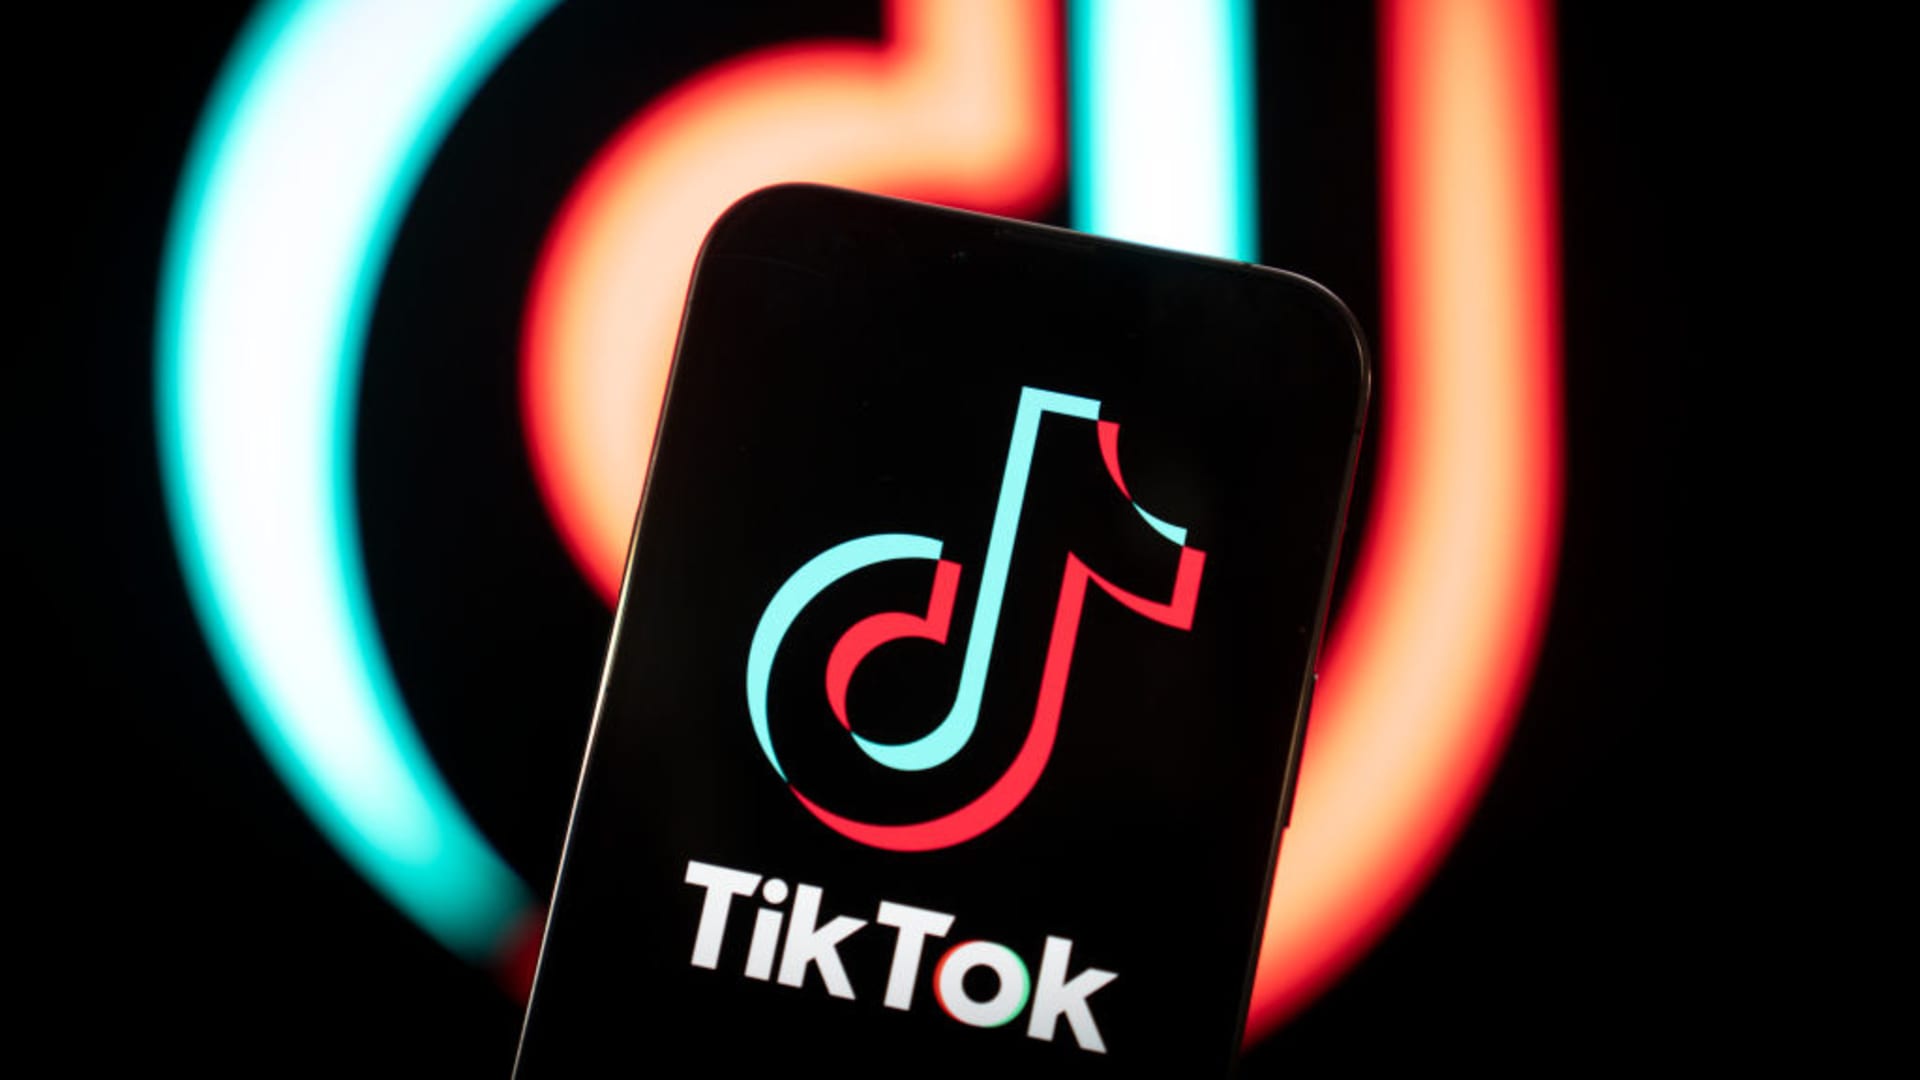 Federal judge blocks Montana's TikTok ban, which would have been the first of its kind